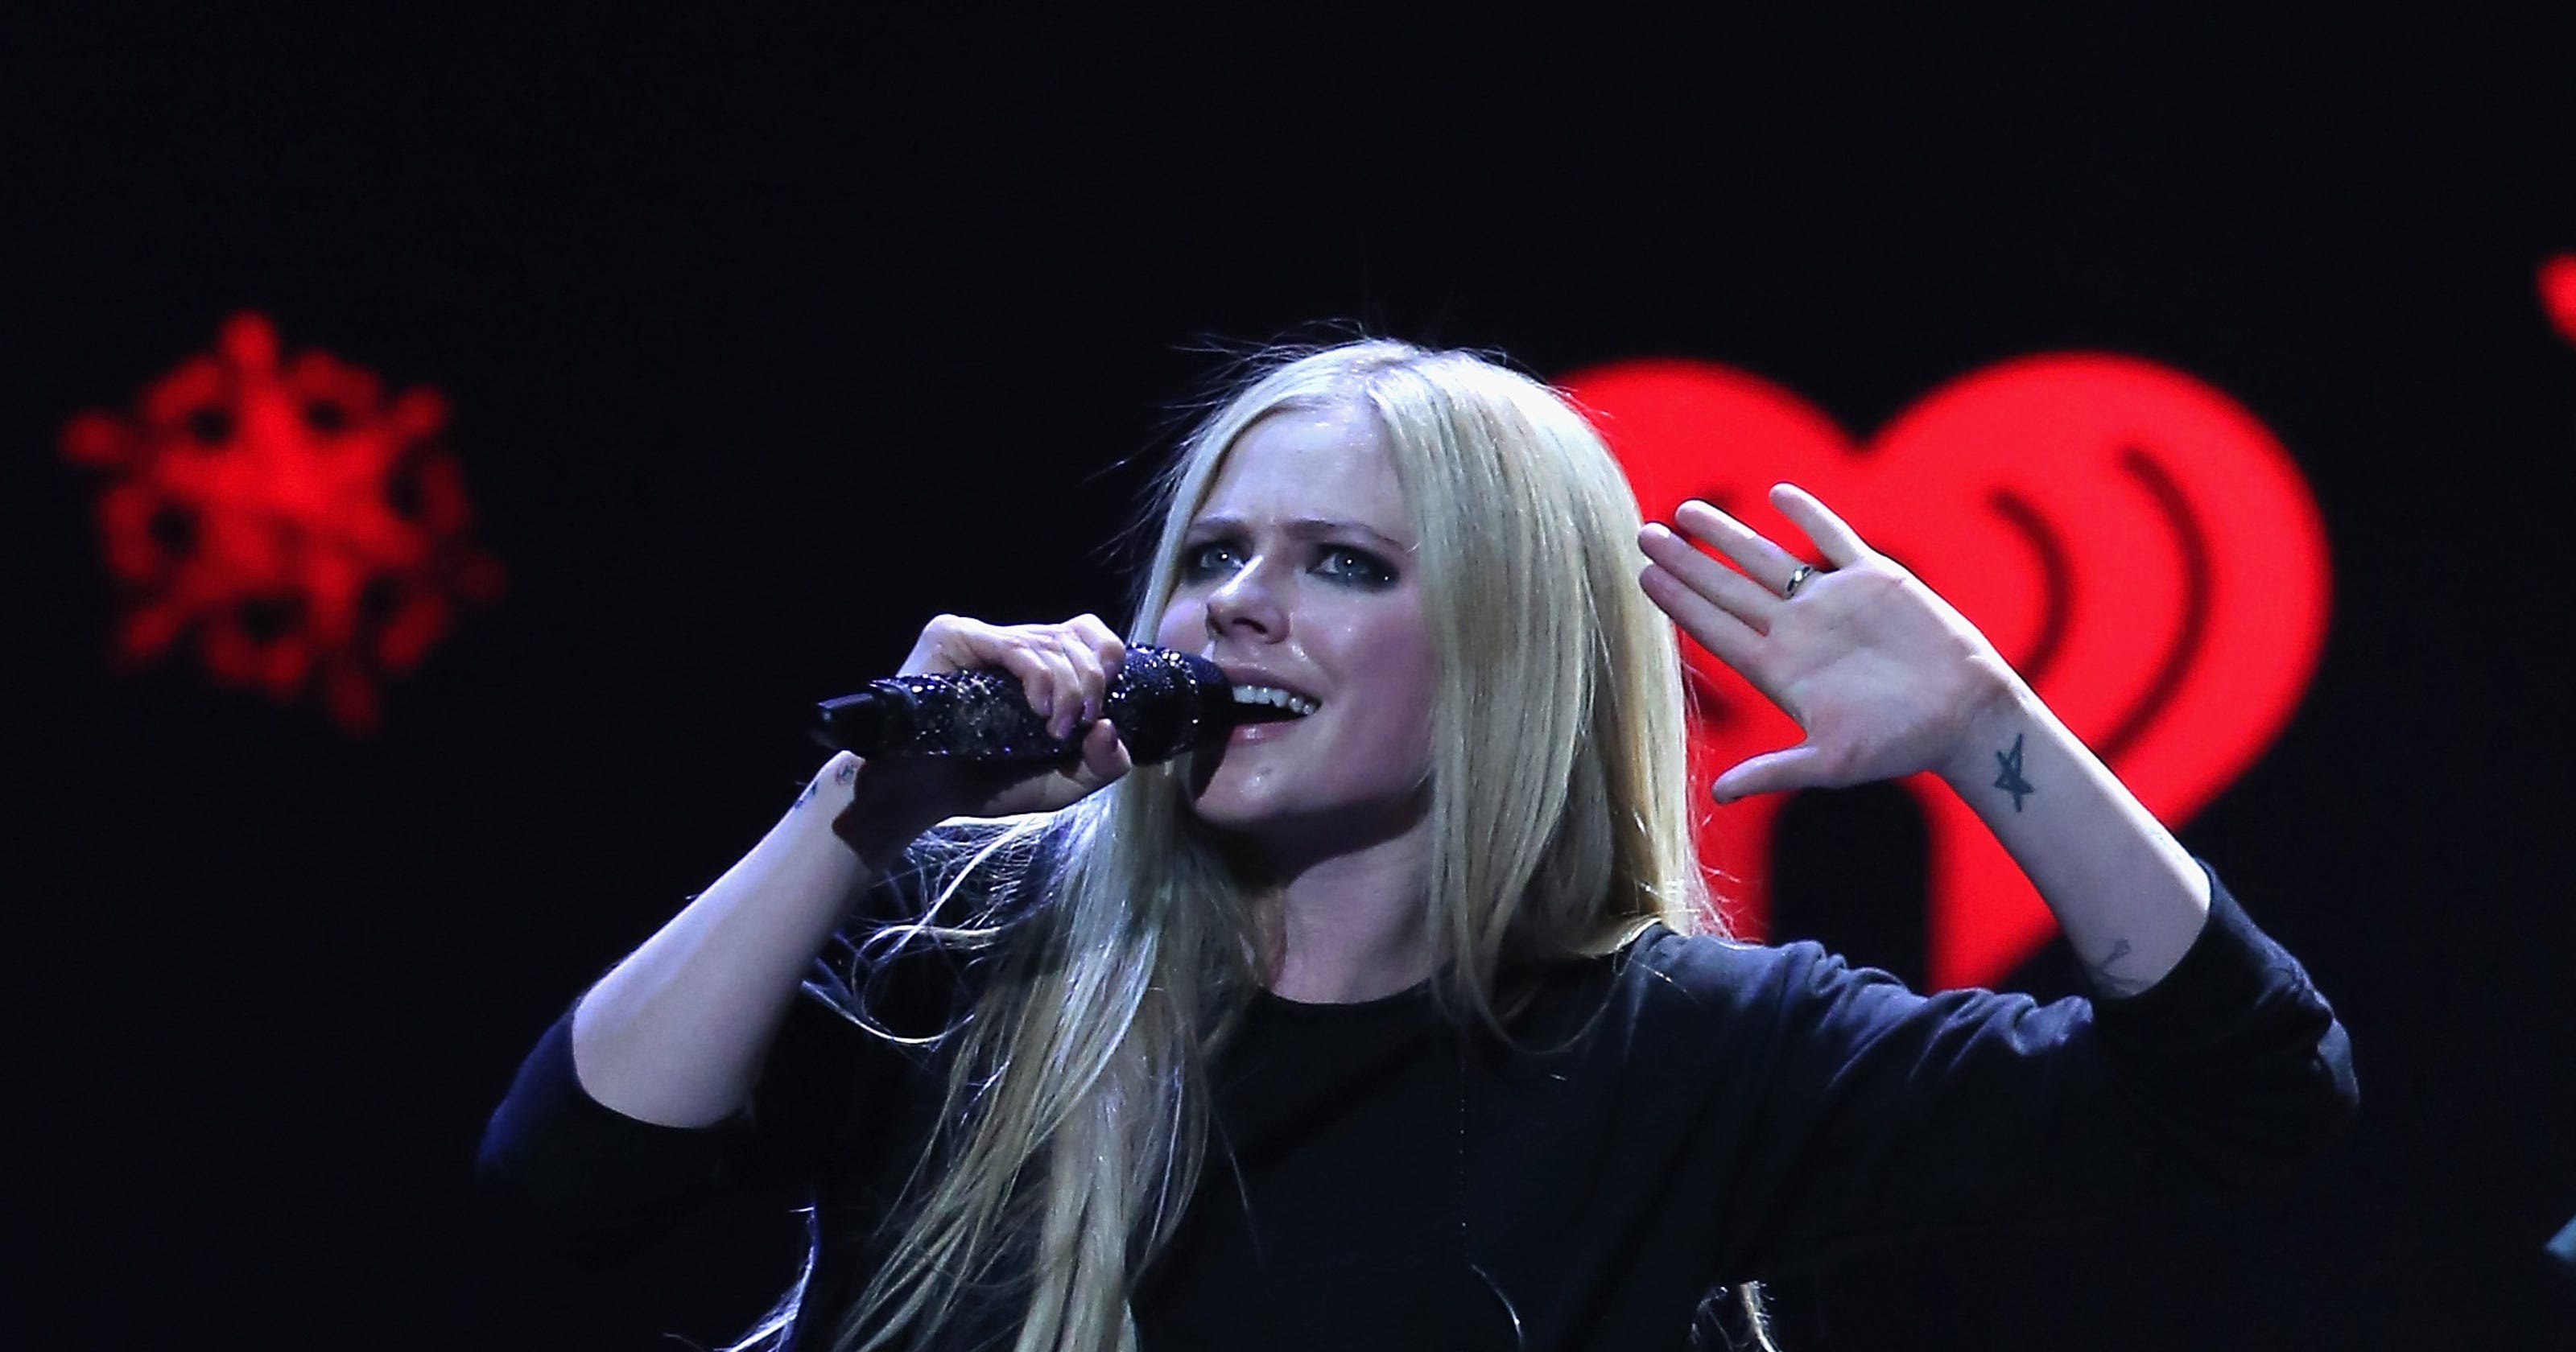 Avril Lavigne on her Lyme disease 'I'm coming out on the other side'